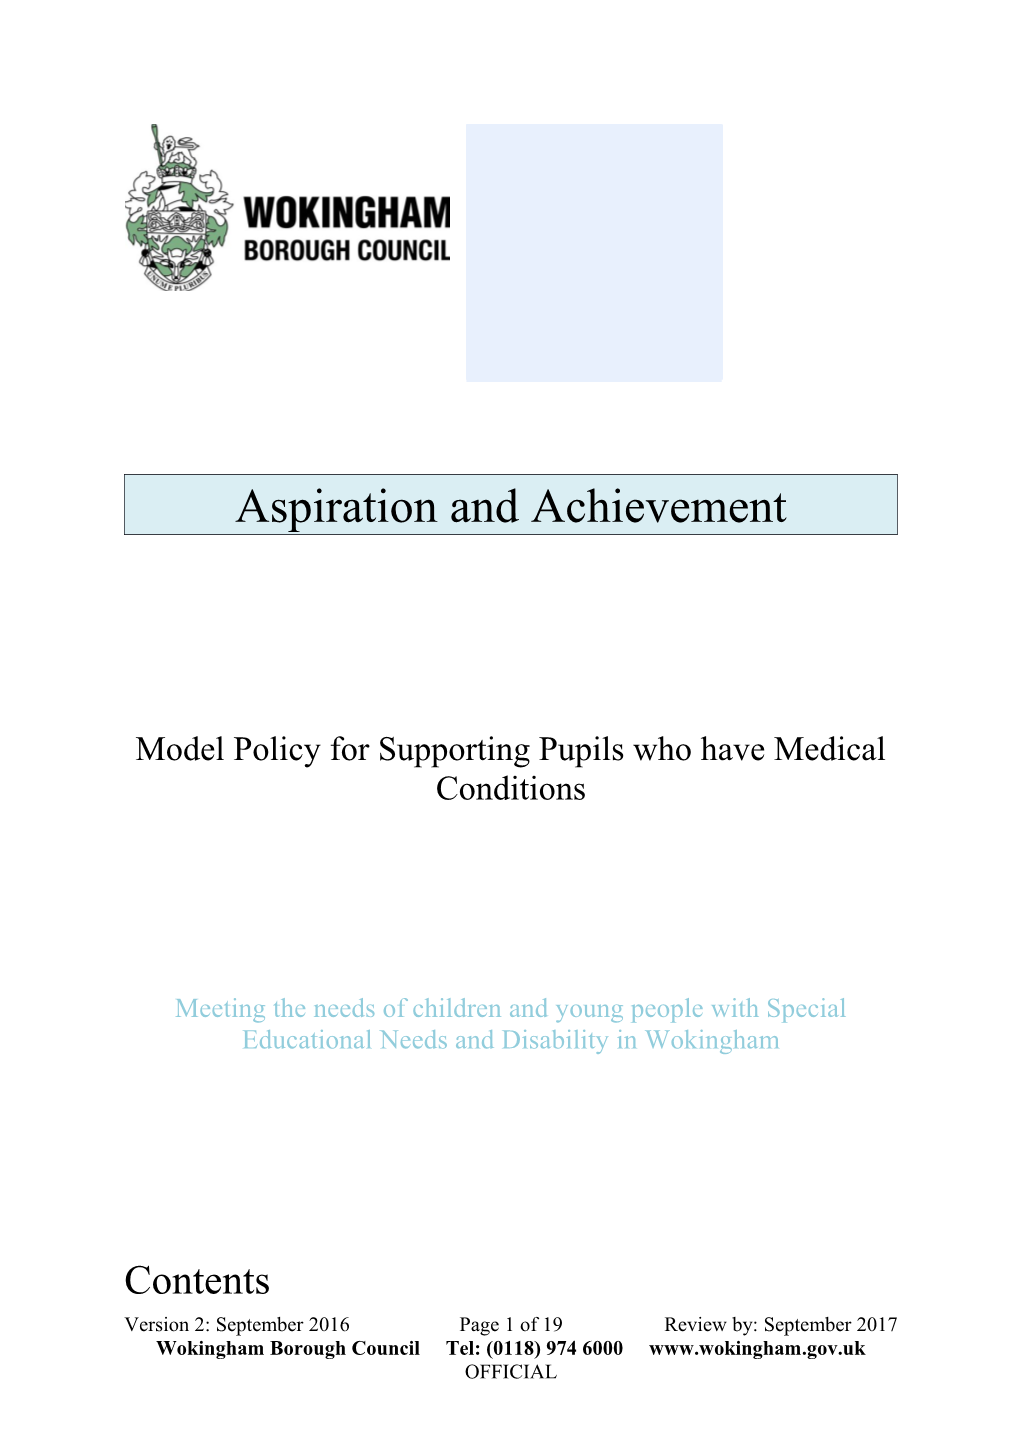 Model Policy for Supporting Pupils Who Have Medical Conditions